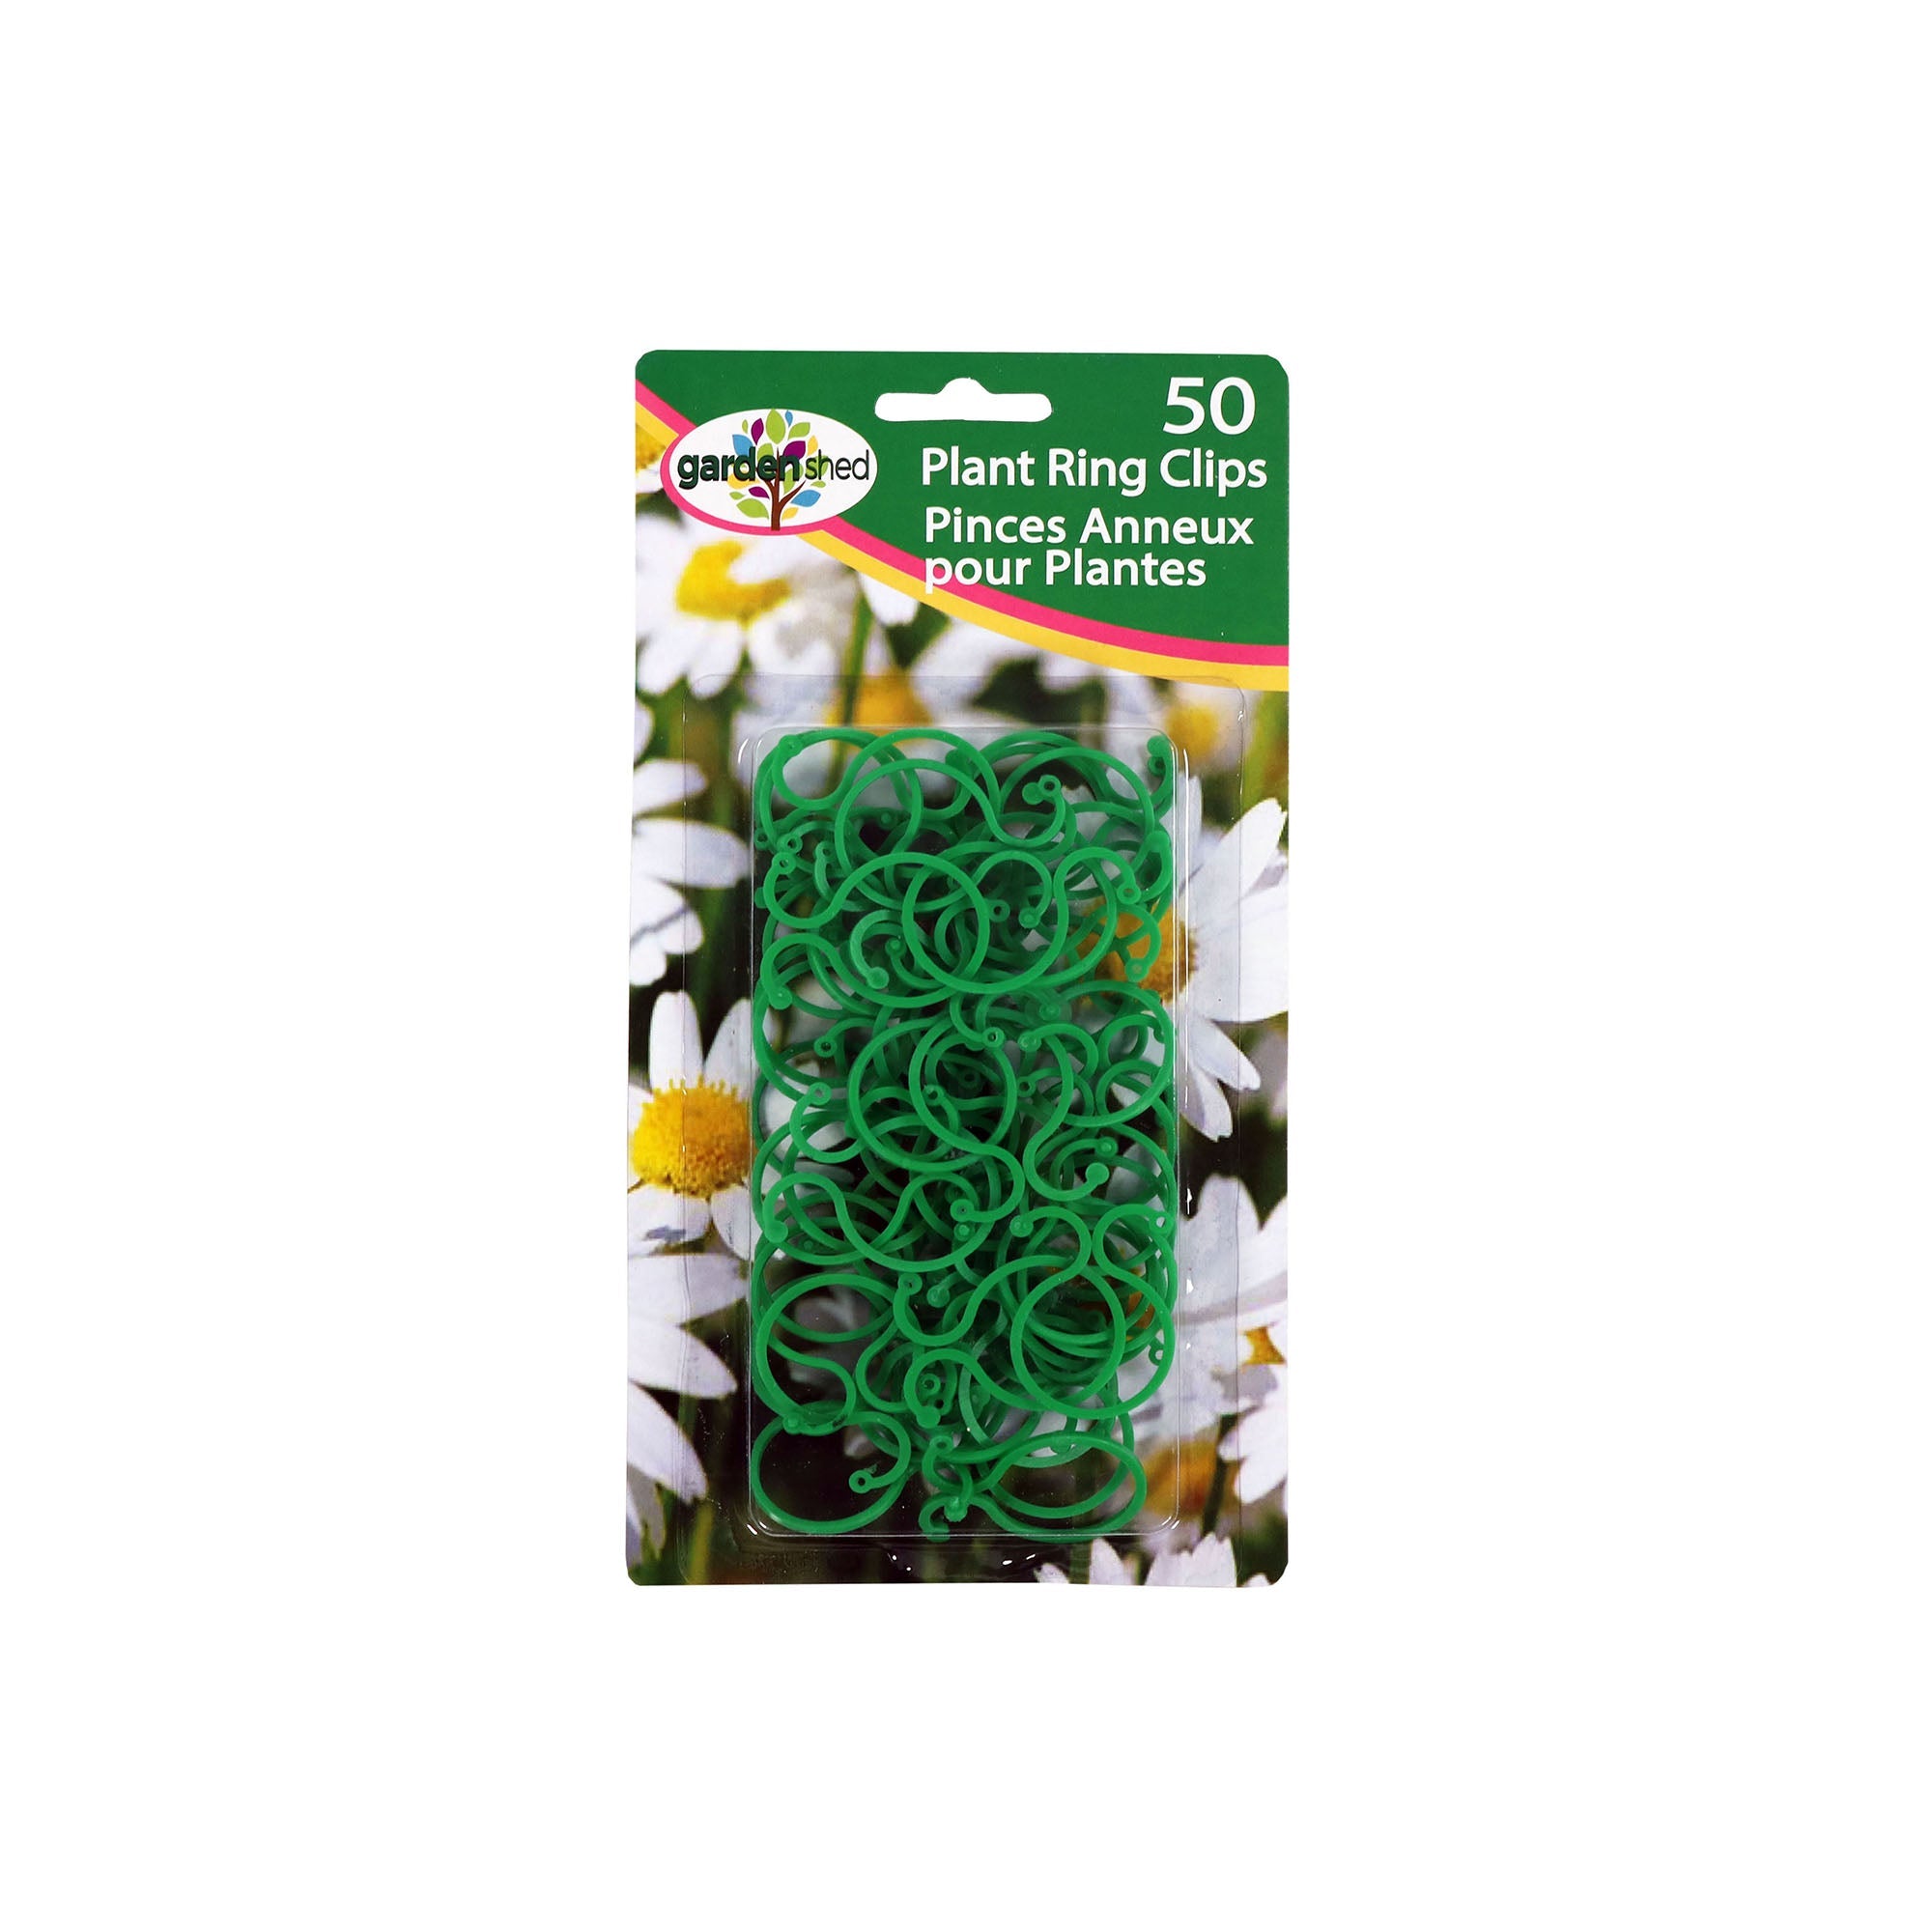 Garden Shed 50 Plant Ring Clips 1.18x1.6in